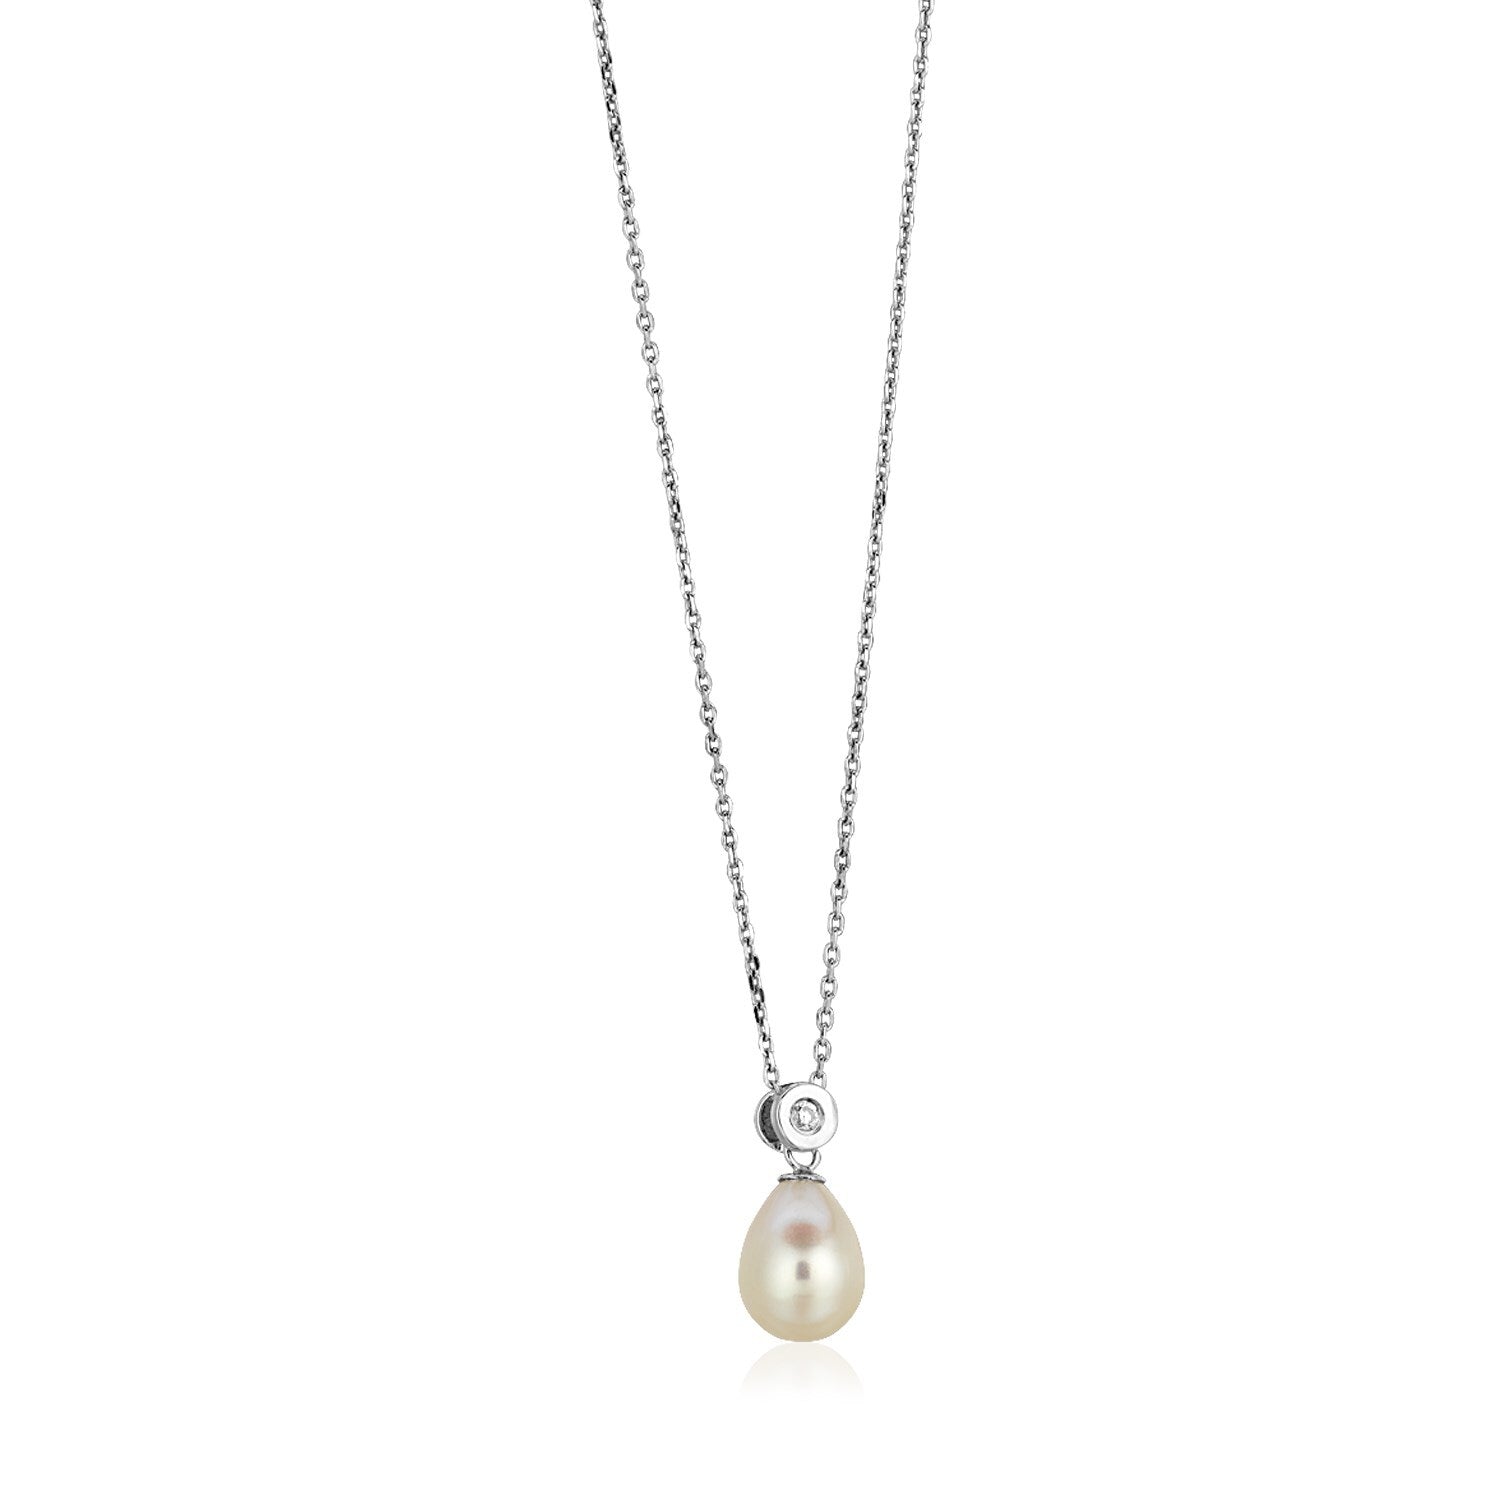 Sterling Silver Necklace with Pear Shaped Pearl and Cubic Zirconias, size 18''